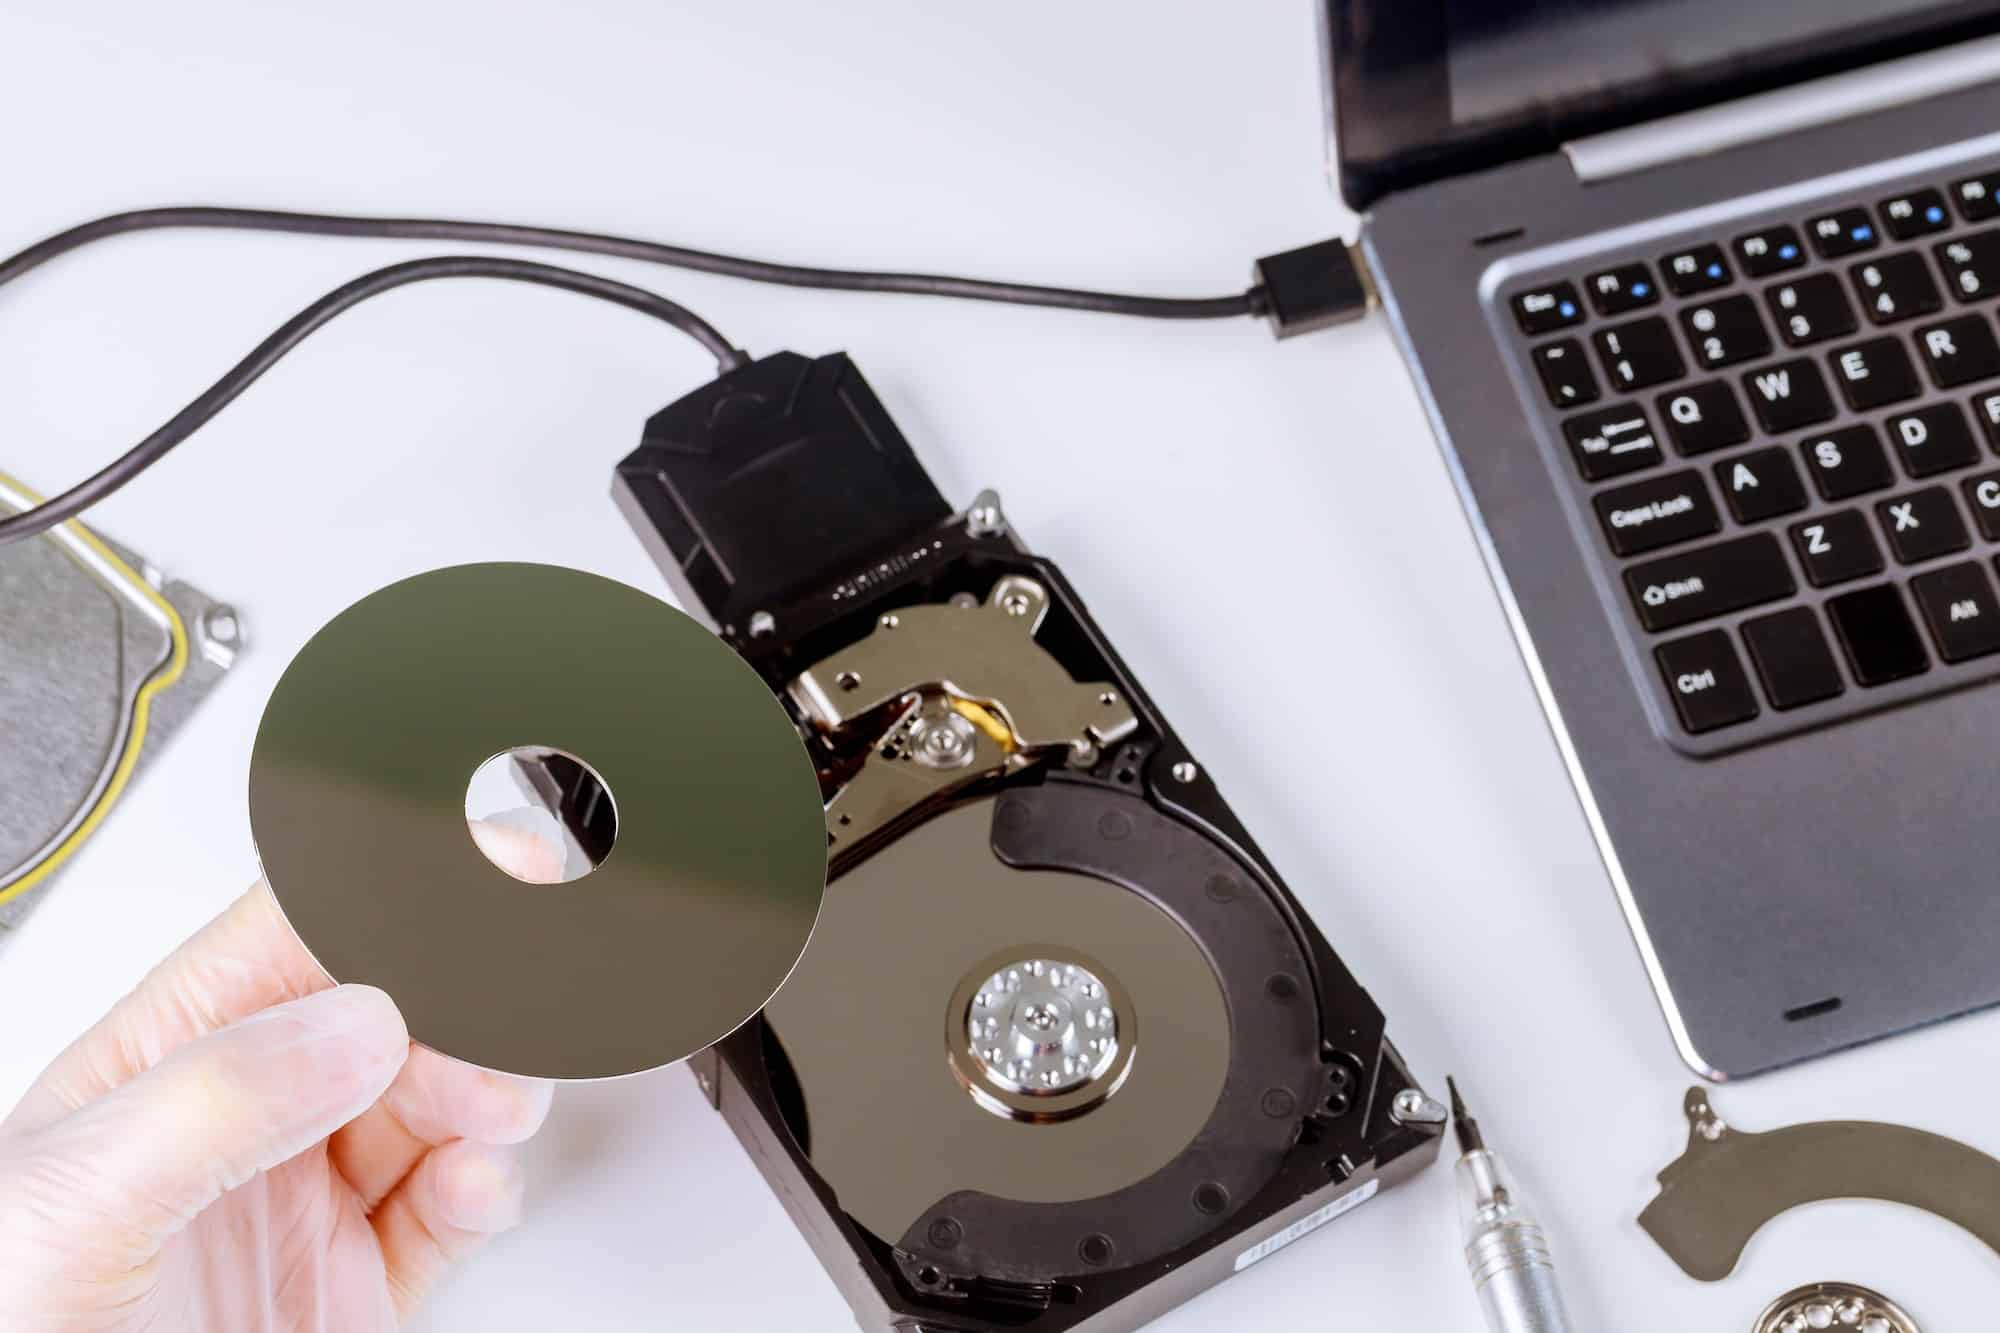 Data Recovery From Formatted Drives: An In-Depth Look At Format Recovery Tools